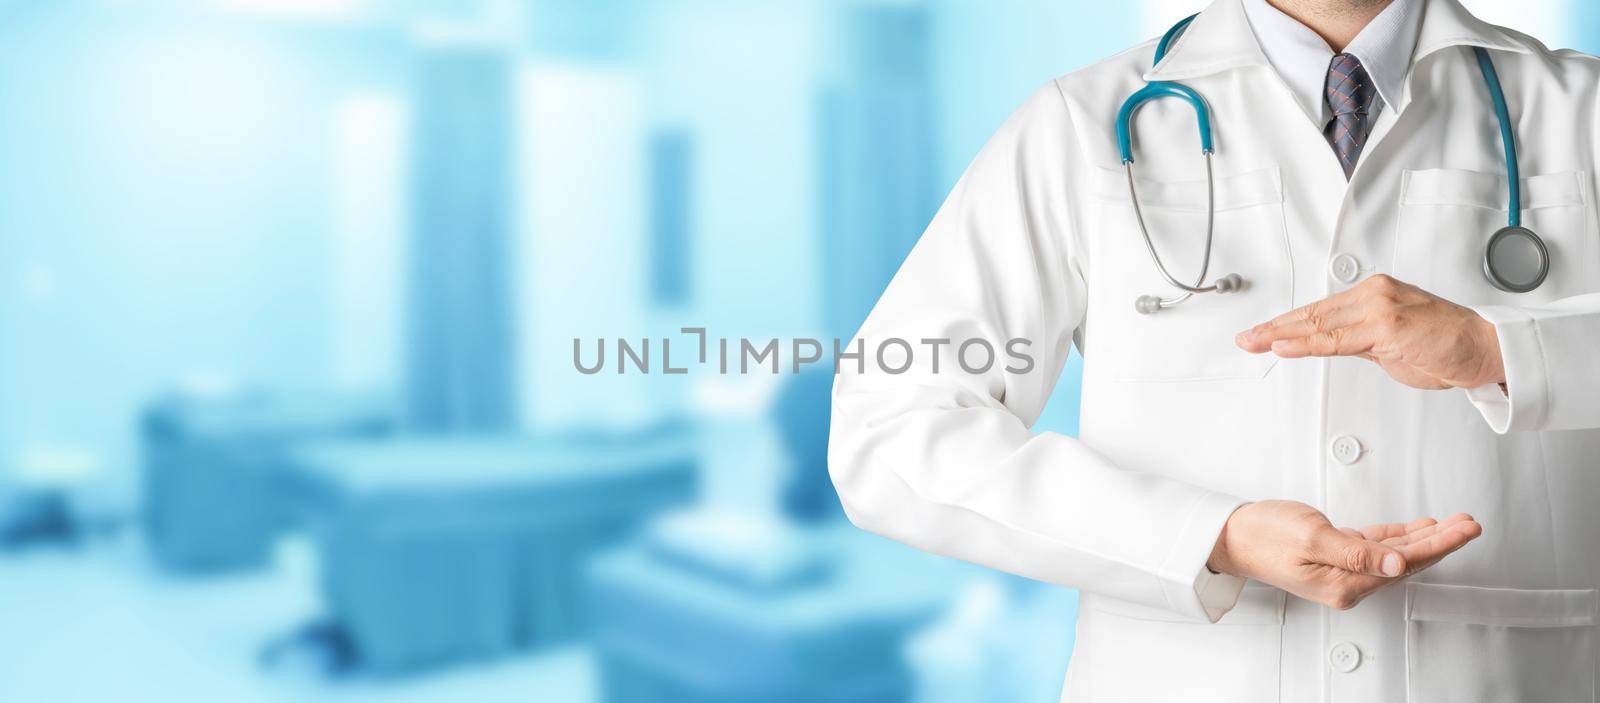 Male doctor at hospital opening hand palm to build copy space for your text and design. Medical healthcare business and doctor service.